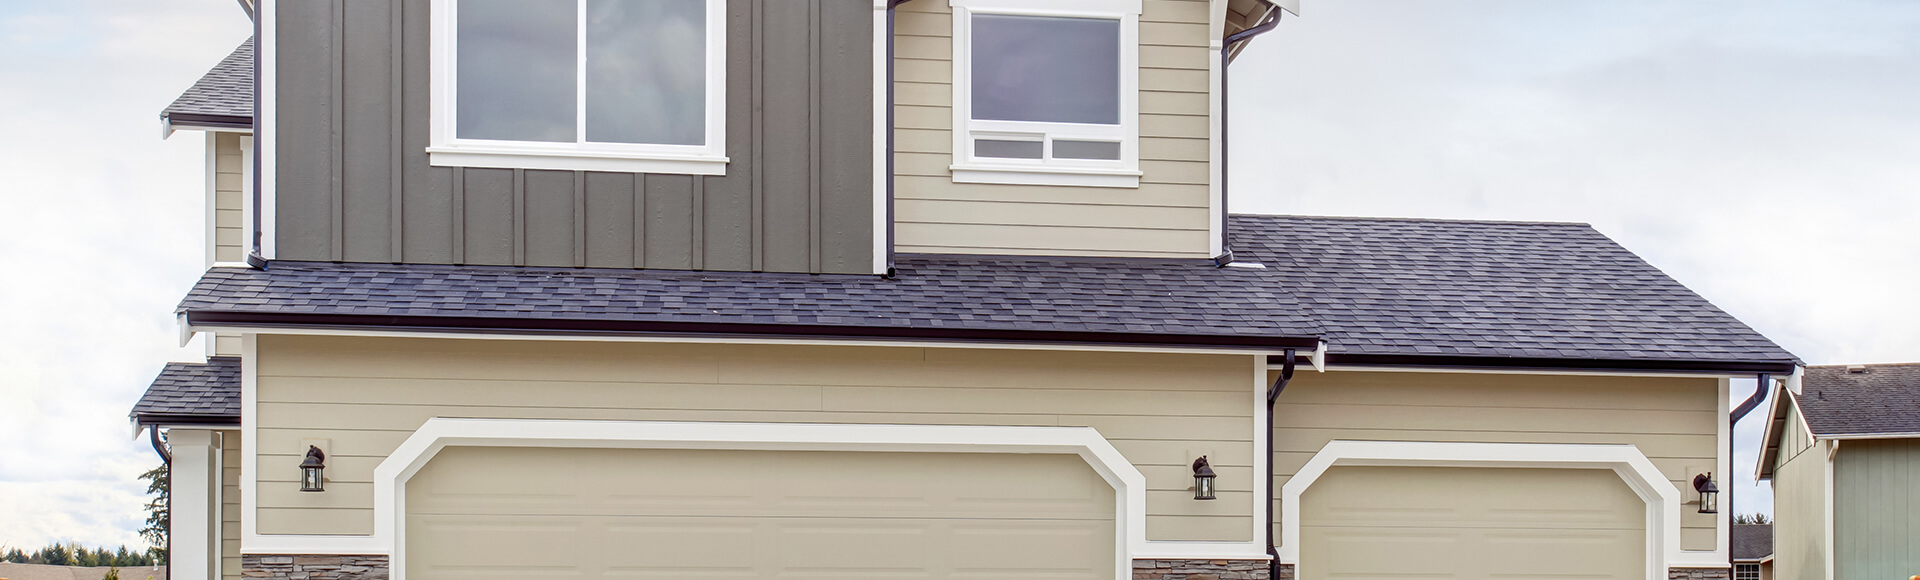 Calgary Roofing Company, Roofing Contractor and Siding Services